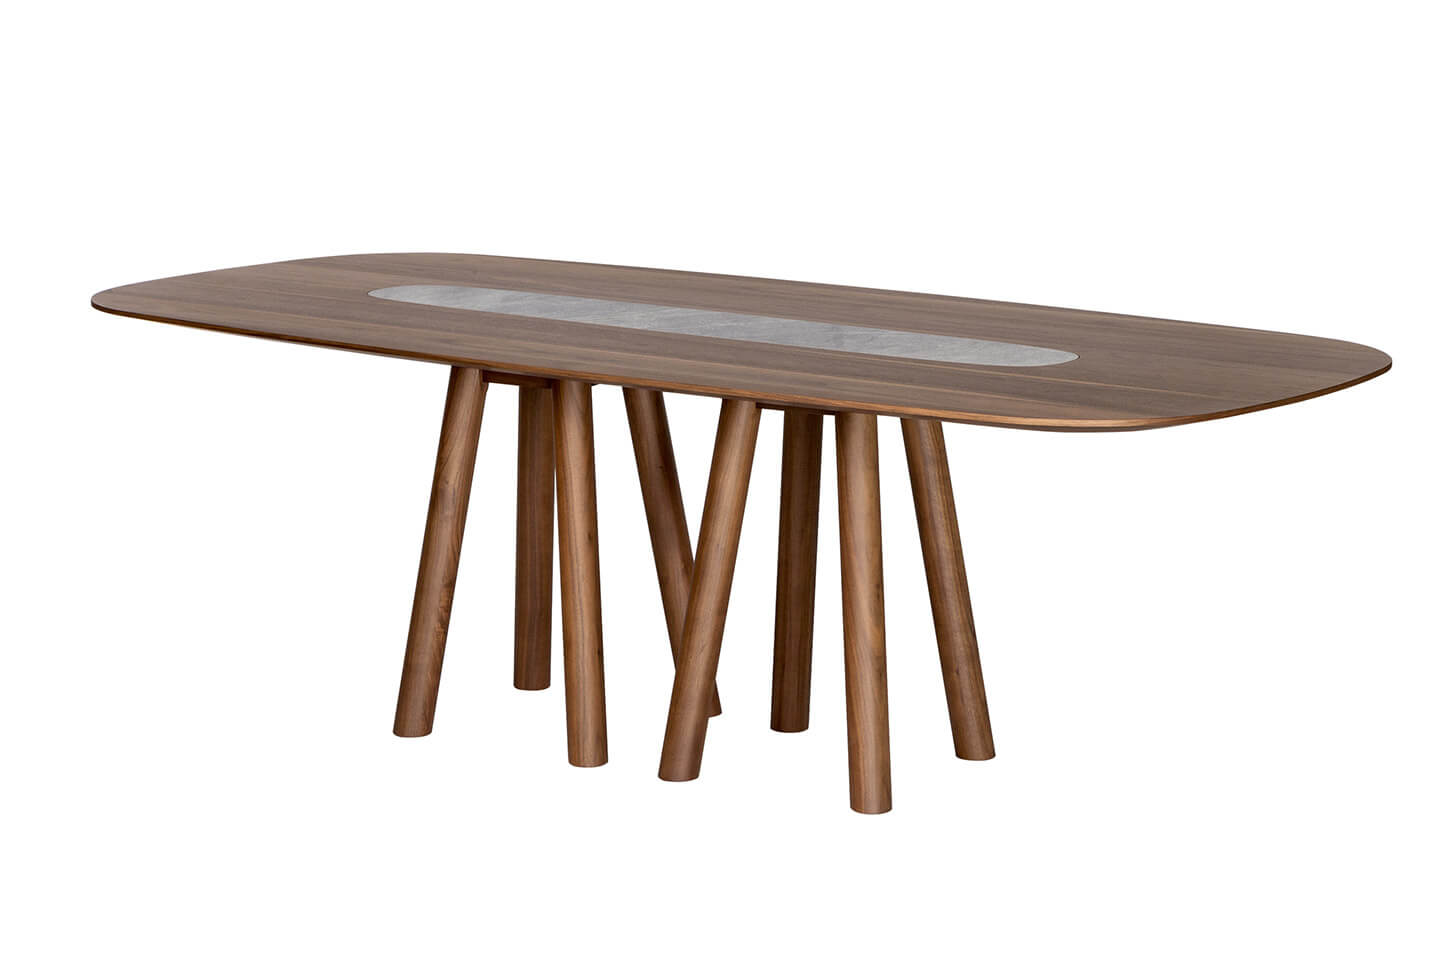 Mos-i-iko e wcer table with top in wood and ceramic